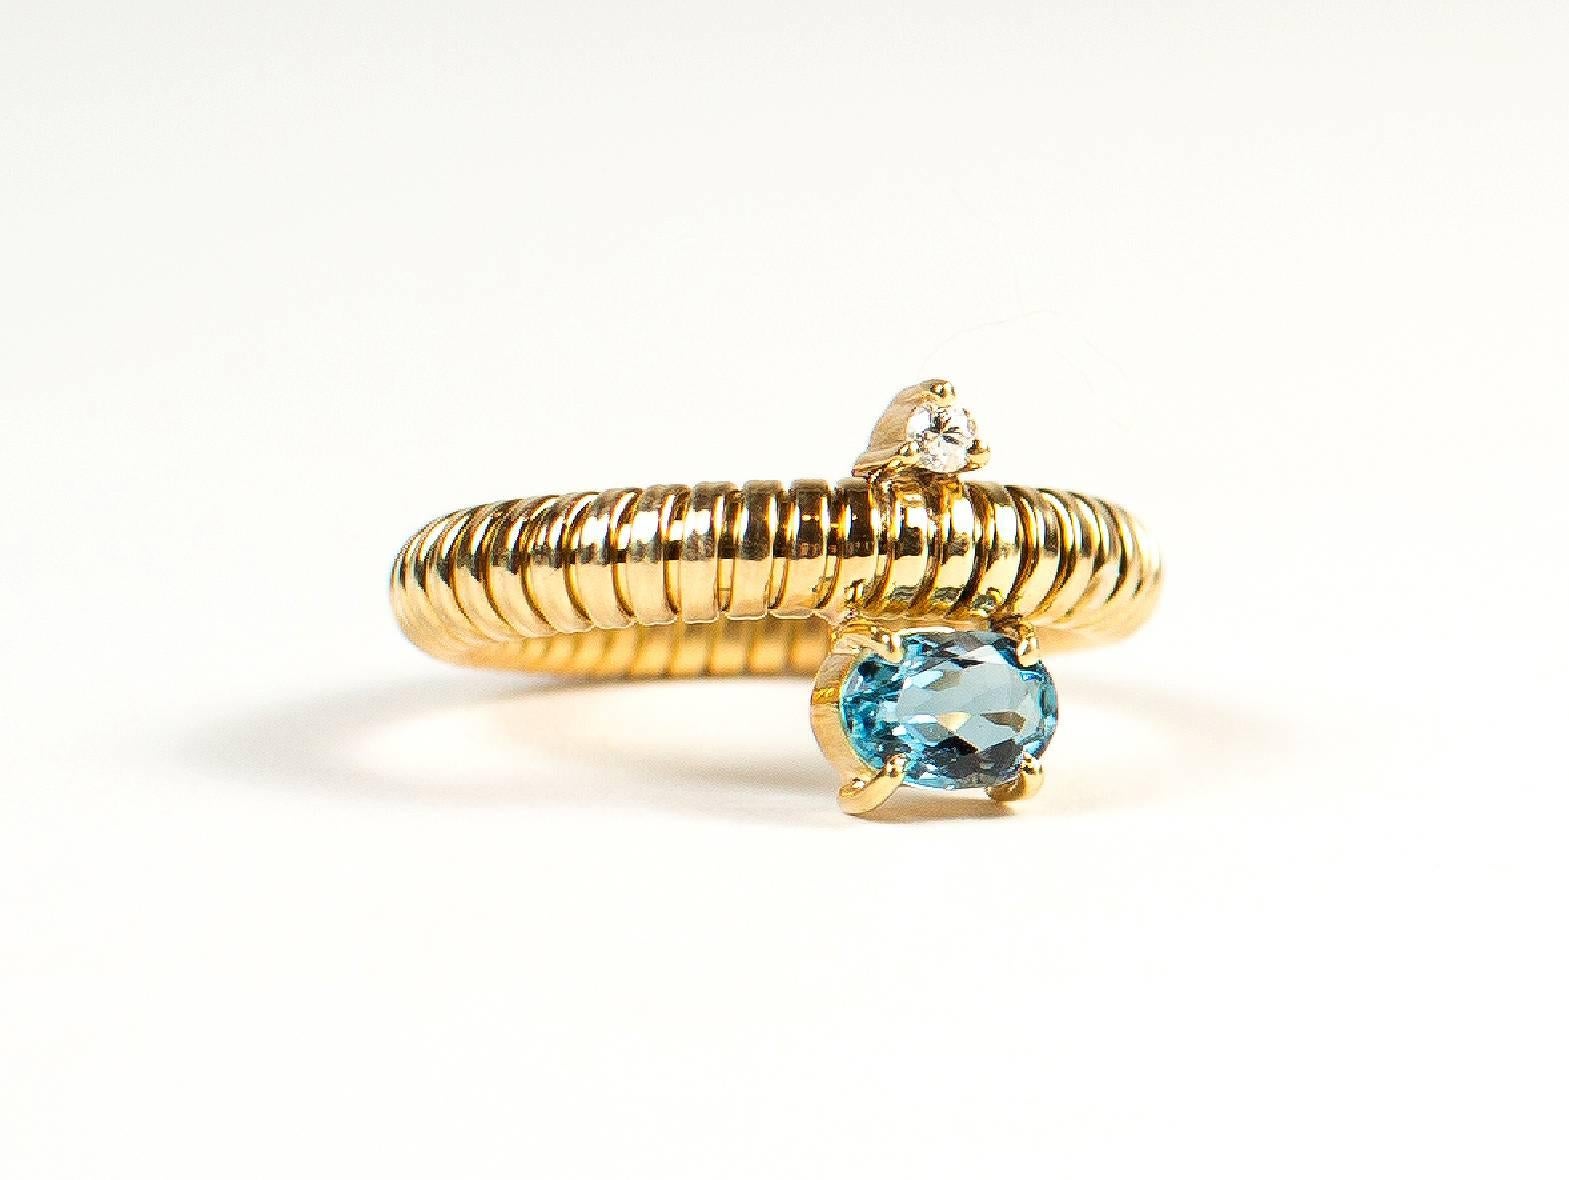 Brazilian handmade flexible 18kt yellow gold ring with sparkling oval aquamarine (approximately 6x4mm) accented with a diamond.   The  flexibility of this ring allows it to easily slip onto you finger, over your knuckle, and fit comfortably.
Size 6.